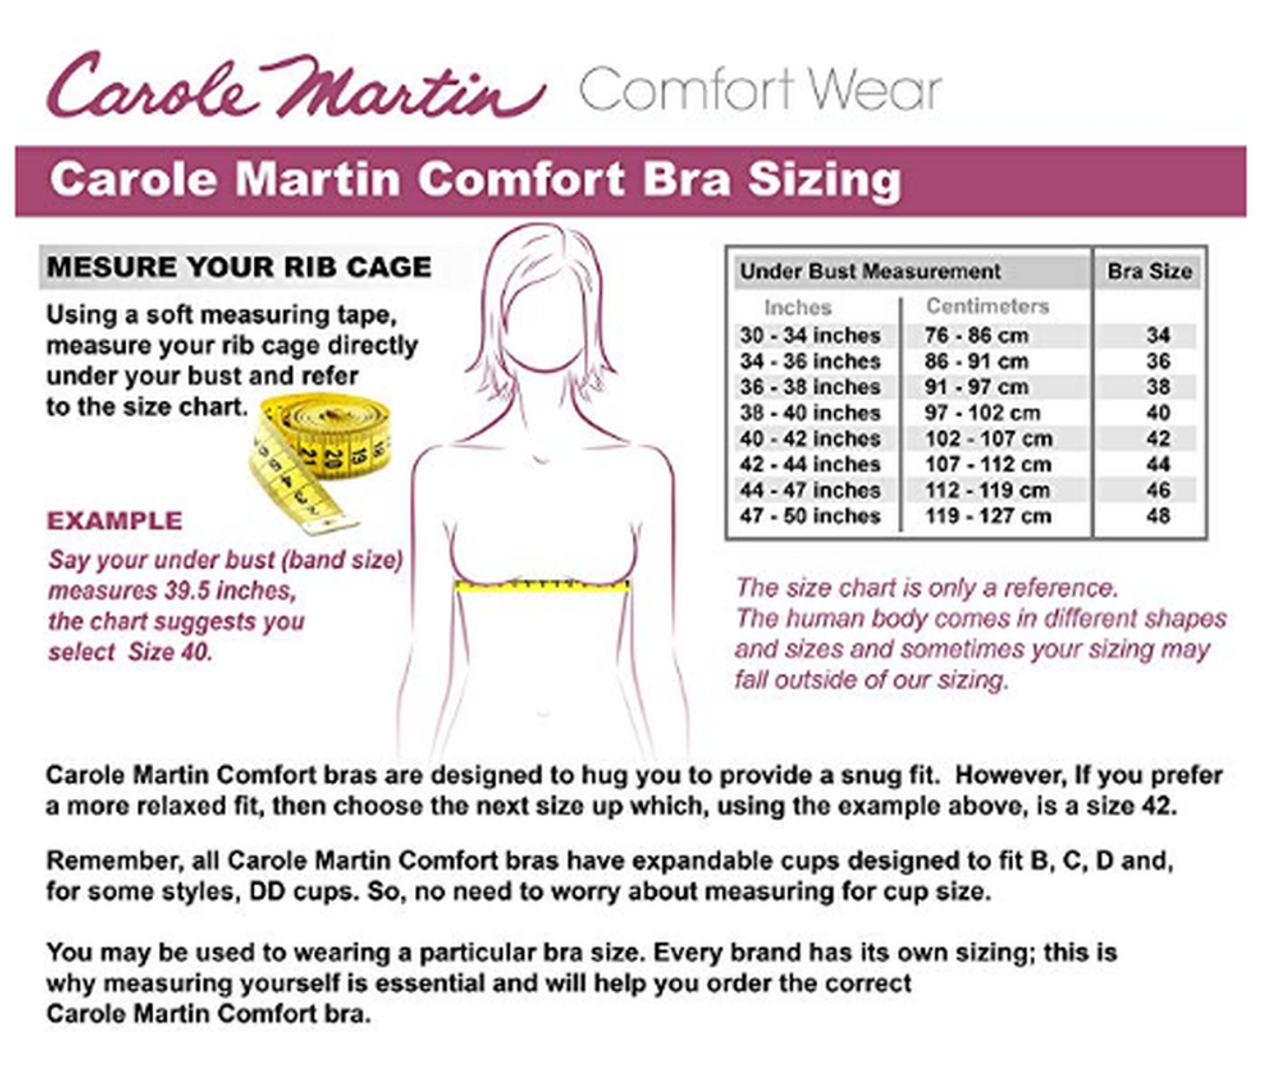 Carole Martin Full-Freedom Wireless Comfort Bras - Expandable Cup Fits B C  D and DD - 3 Pack White, Beige, Black Size 36